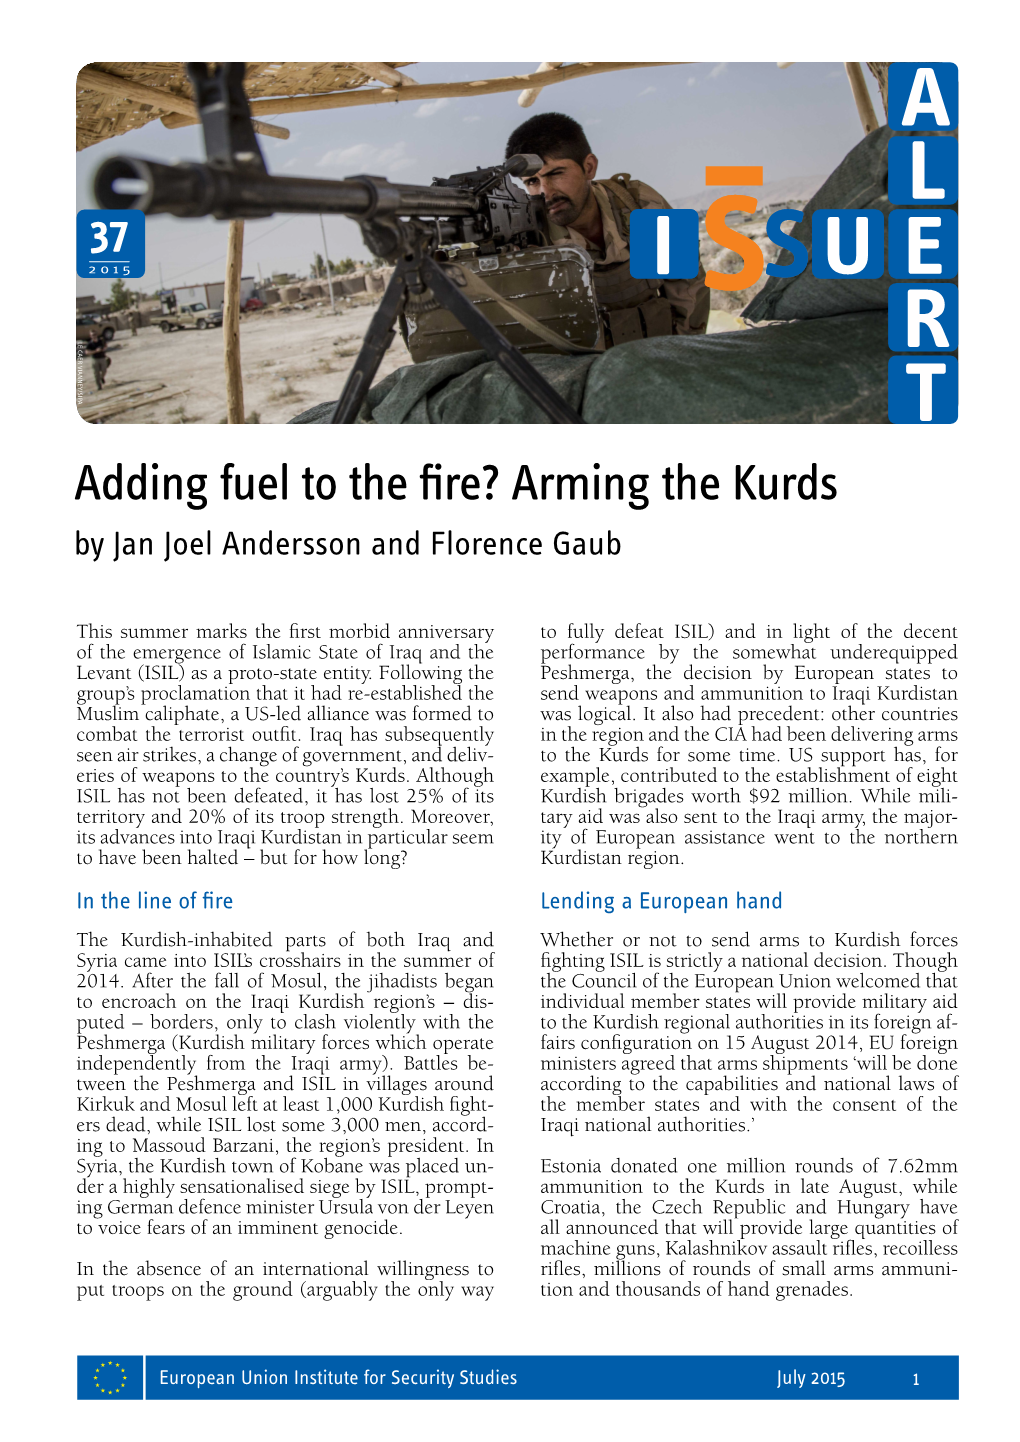 Arming the Kurds by Jan Joel Andersson and Florence Gaub